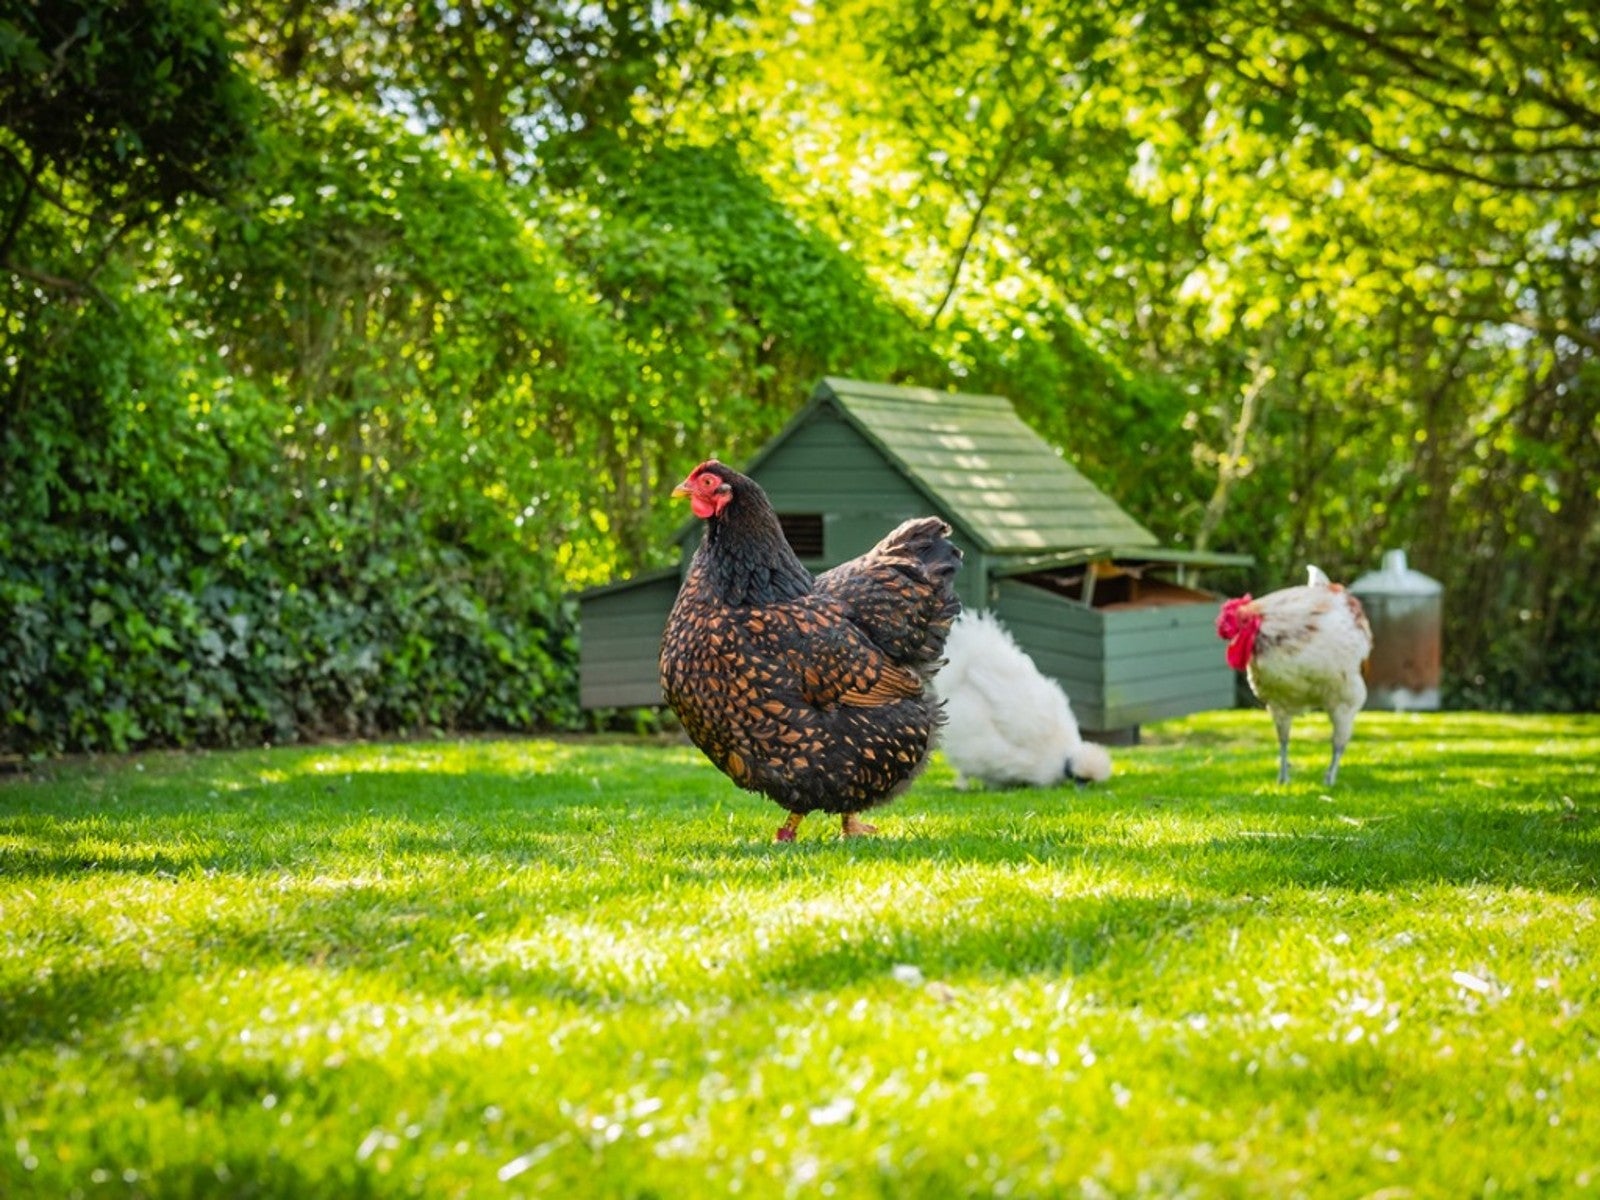 Three chickens wander the lawn in front of a green chicken coop